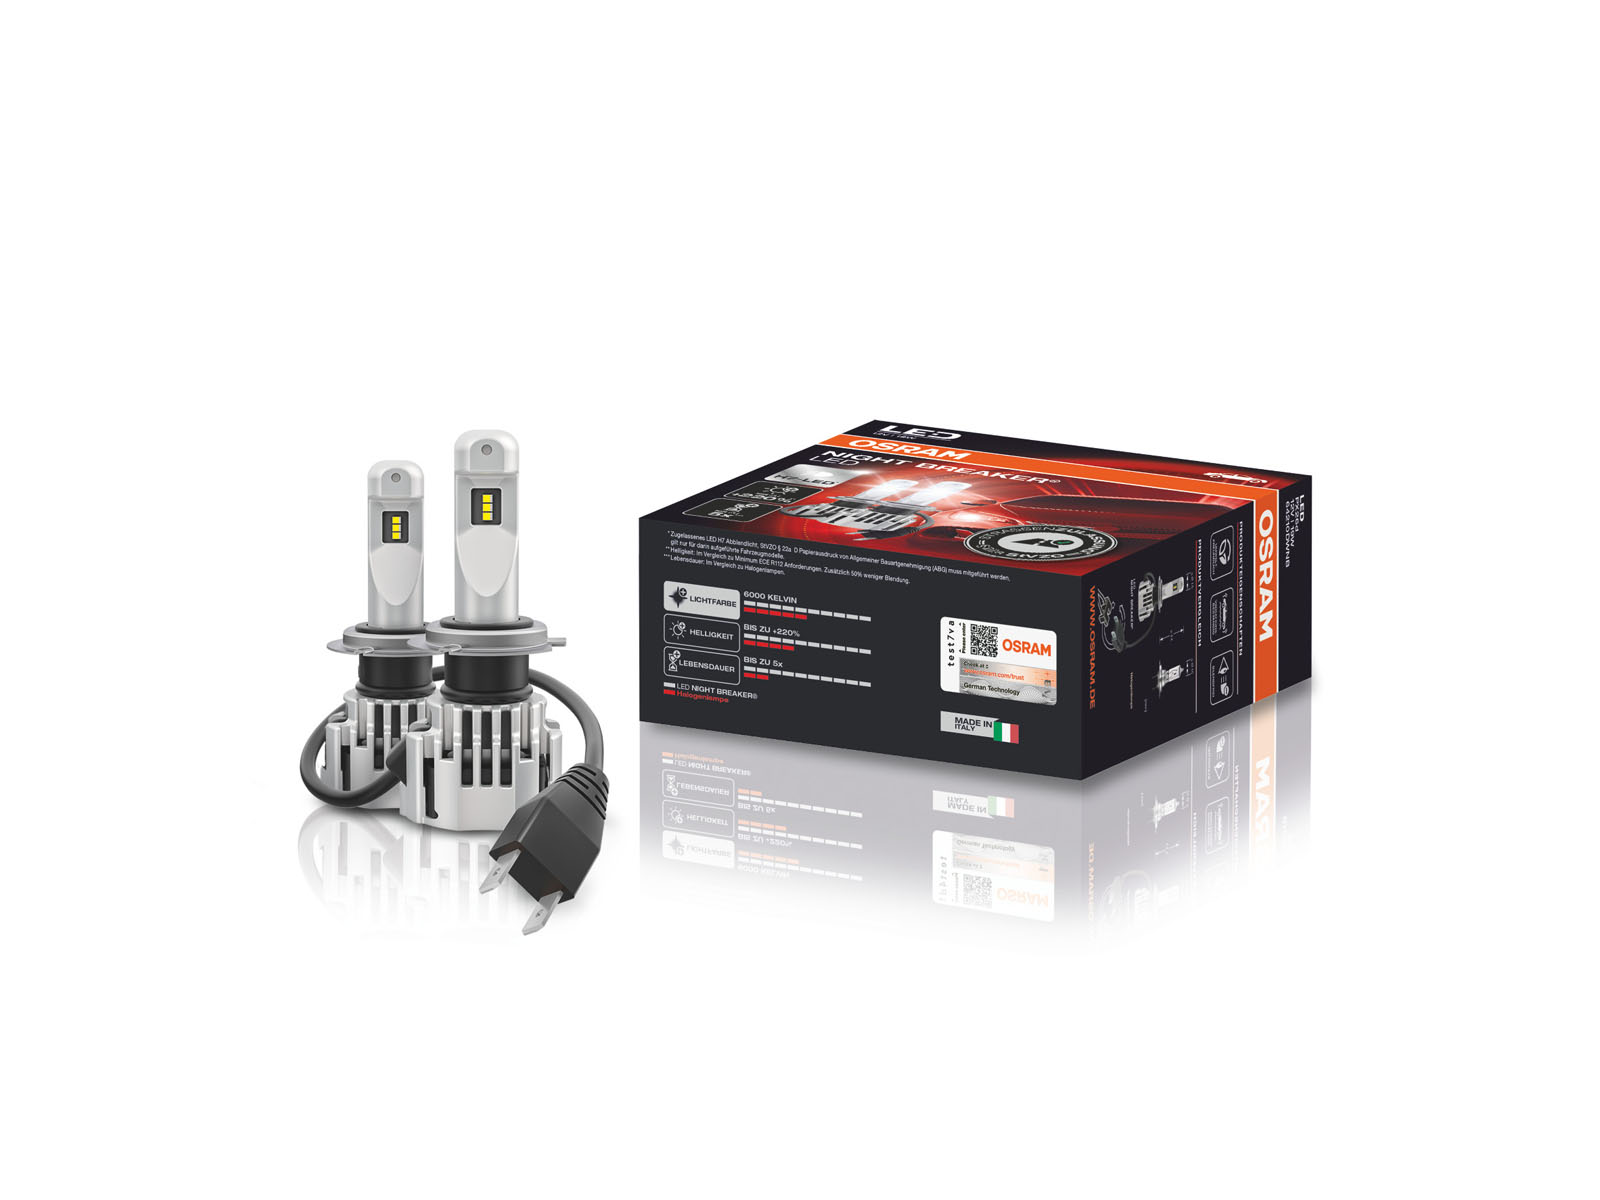 OSRAM H7 LED Night Breaker with Road Approval CHOICE: LEDs, Adapters or Sets